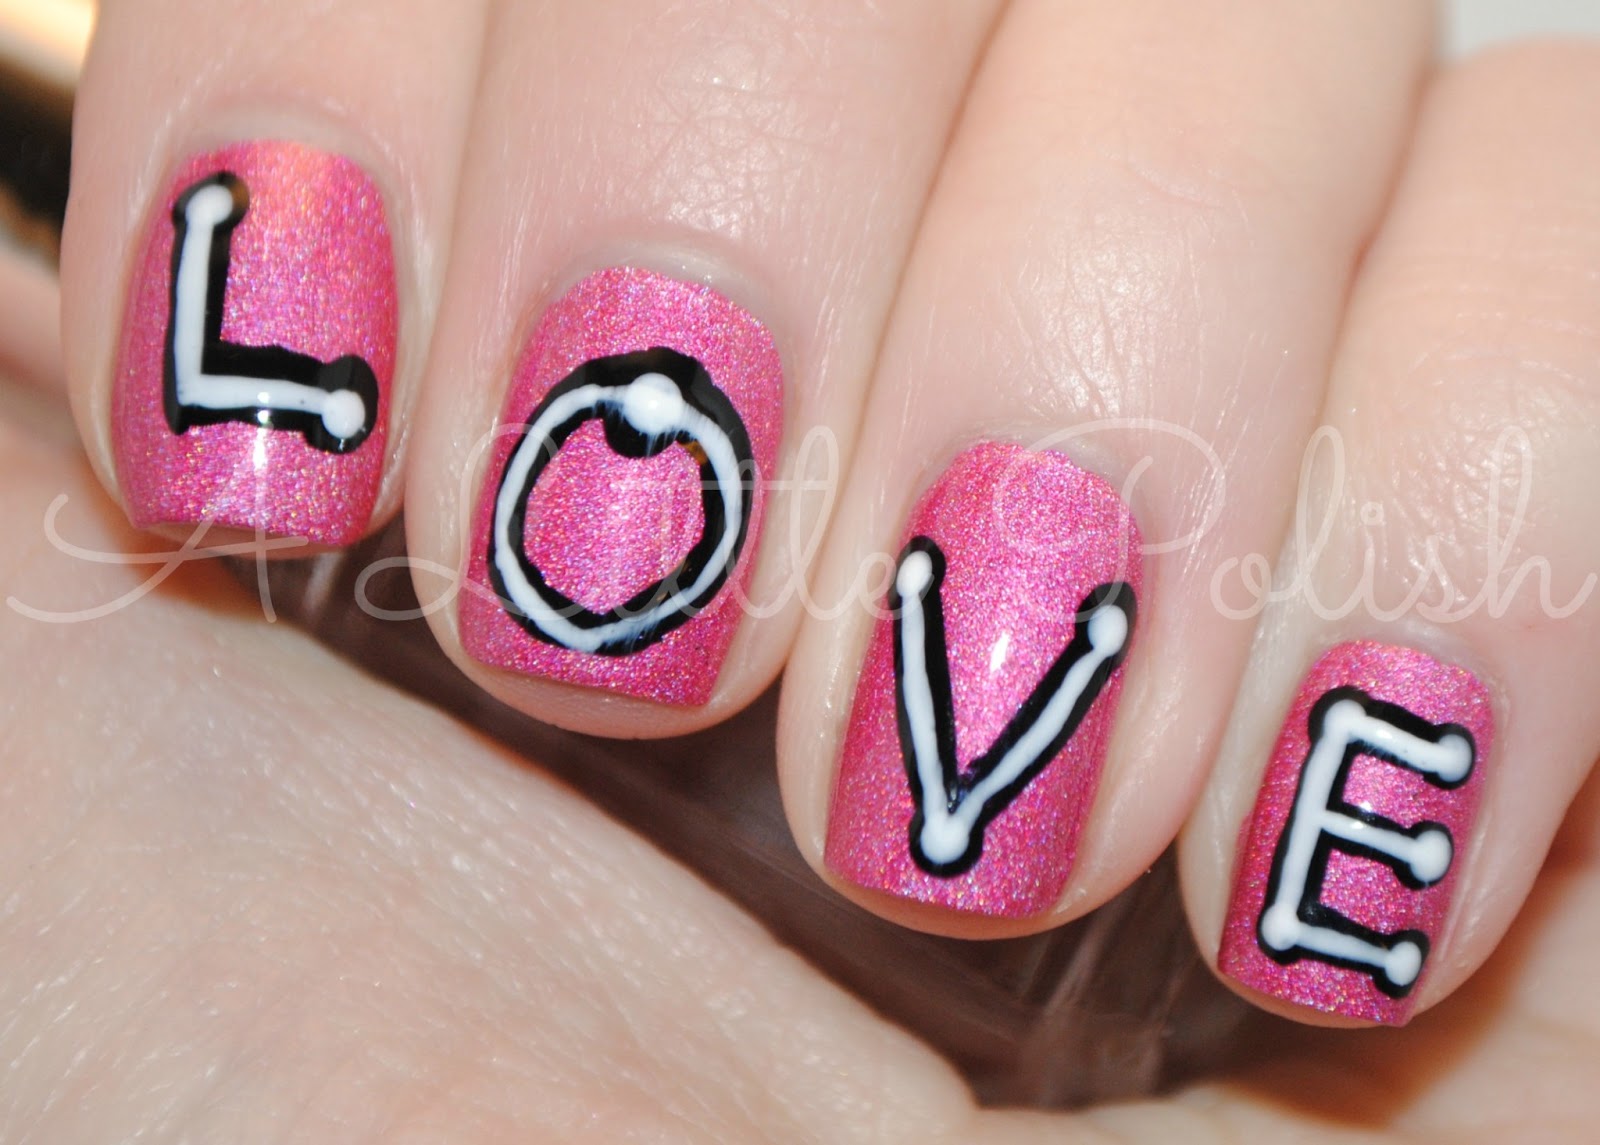 February Nail Designs with Love and Heart Themes - wide 3